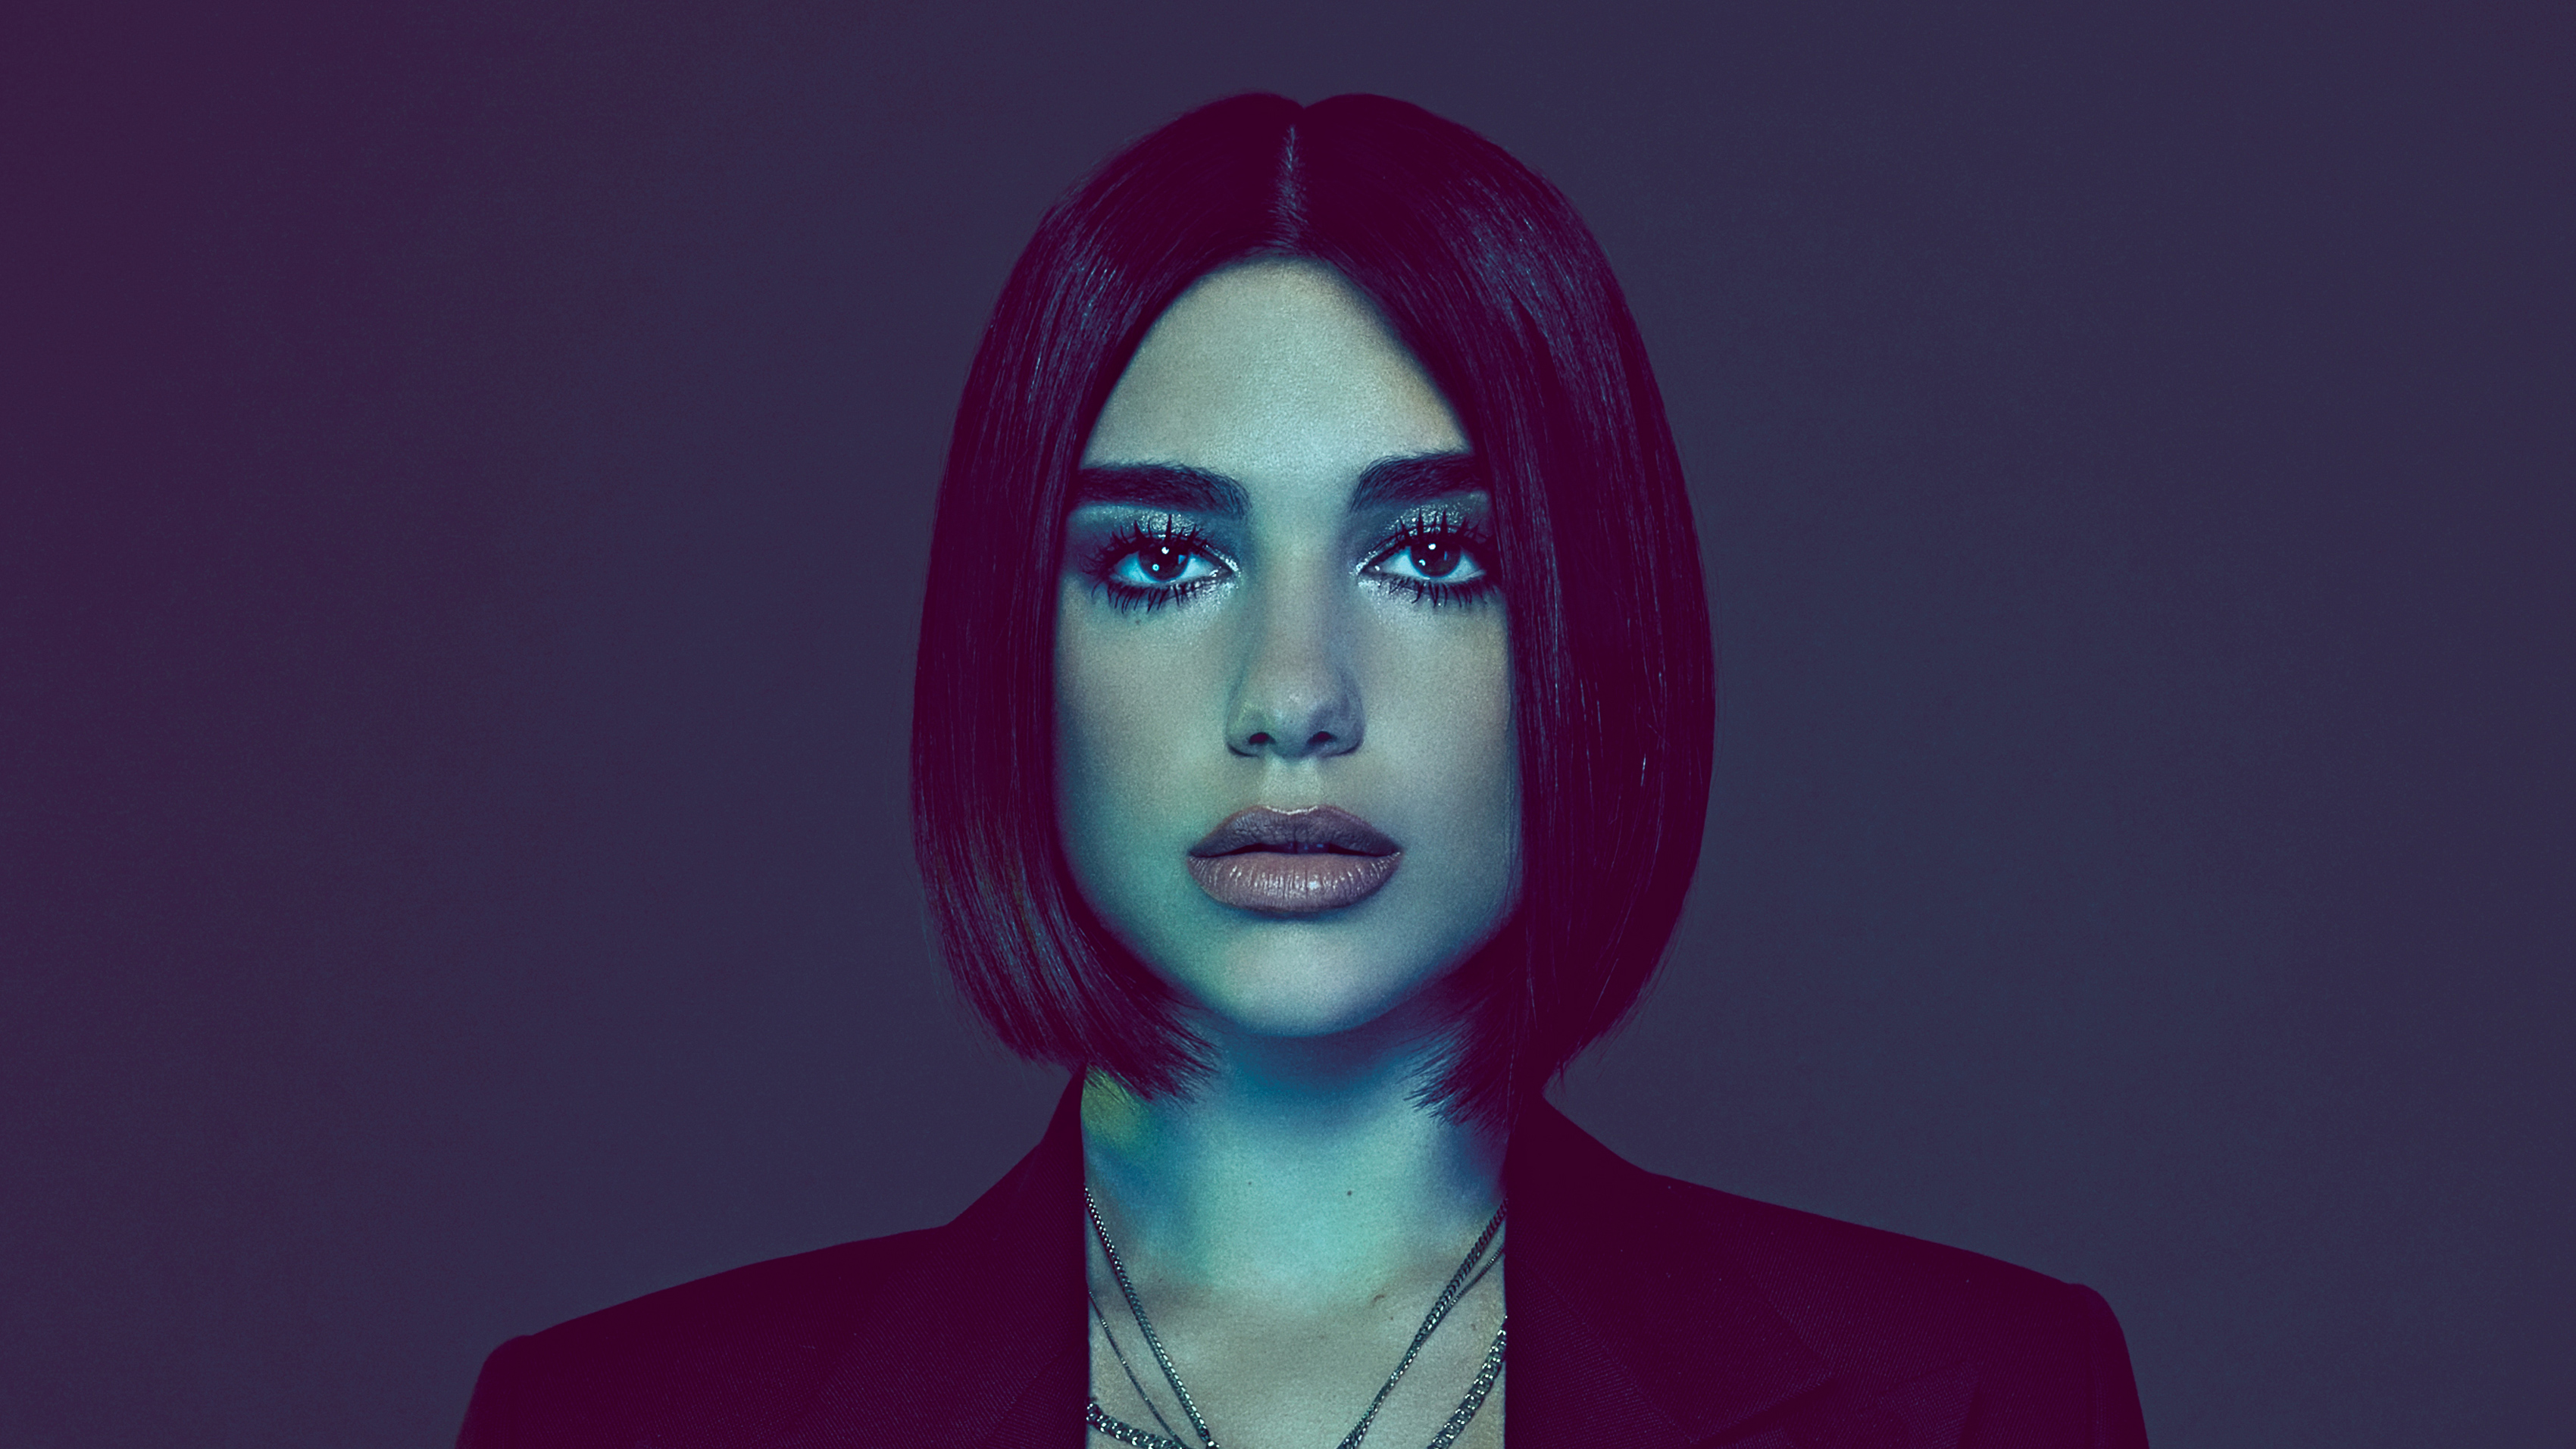 Dua lipa new hd celebrities k wallpapers images backgrounds photos and pictures